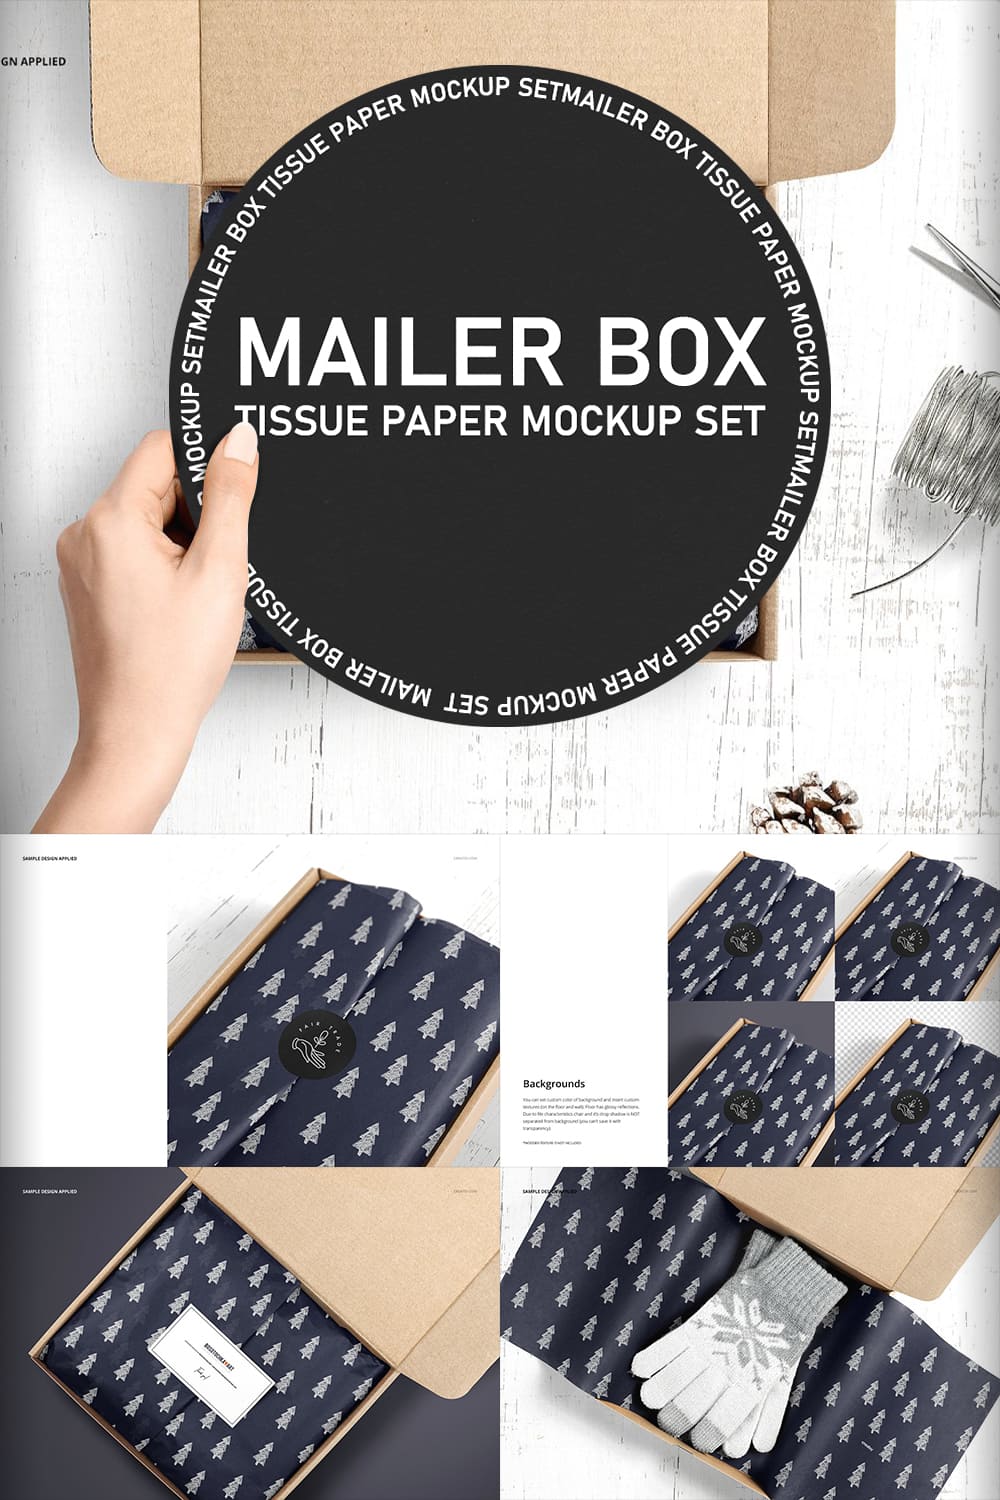 Pinterest - Mailer Box Wrapping Tissue Paper Mockup Set.